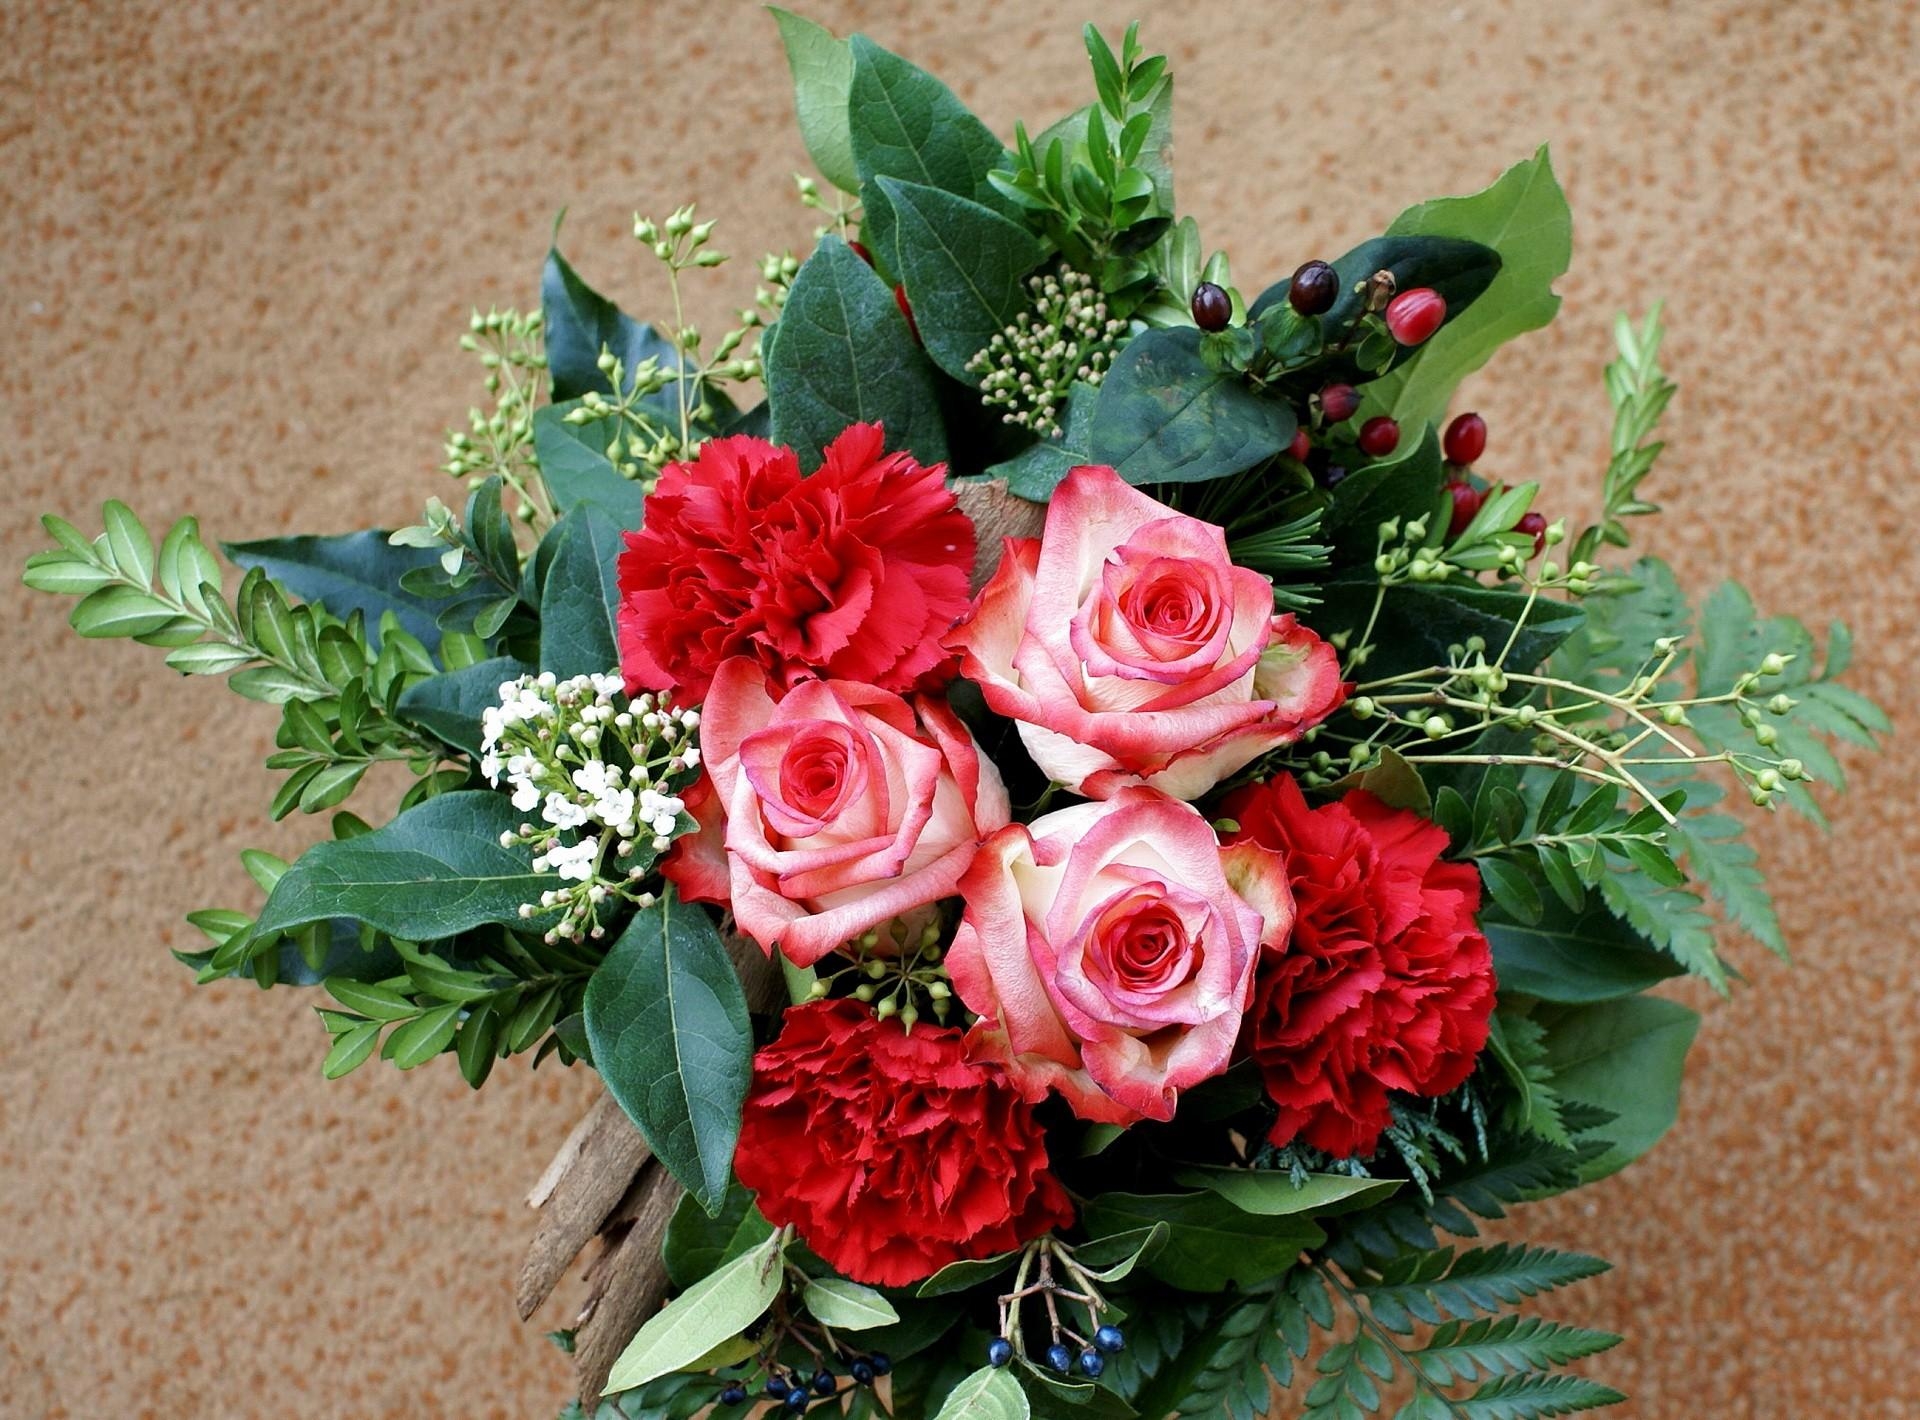 bouquet, flowers, roses, leaves, carnations, greens, composition